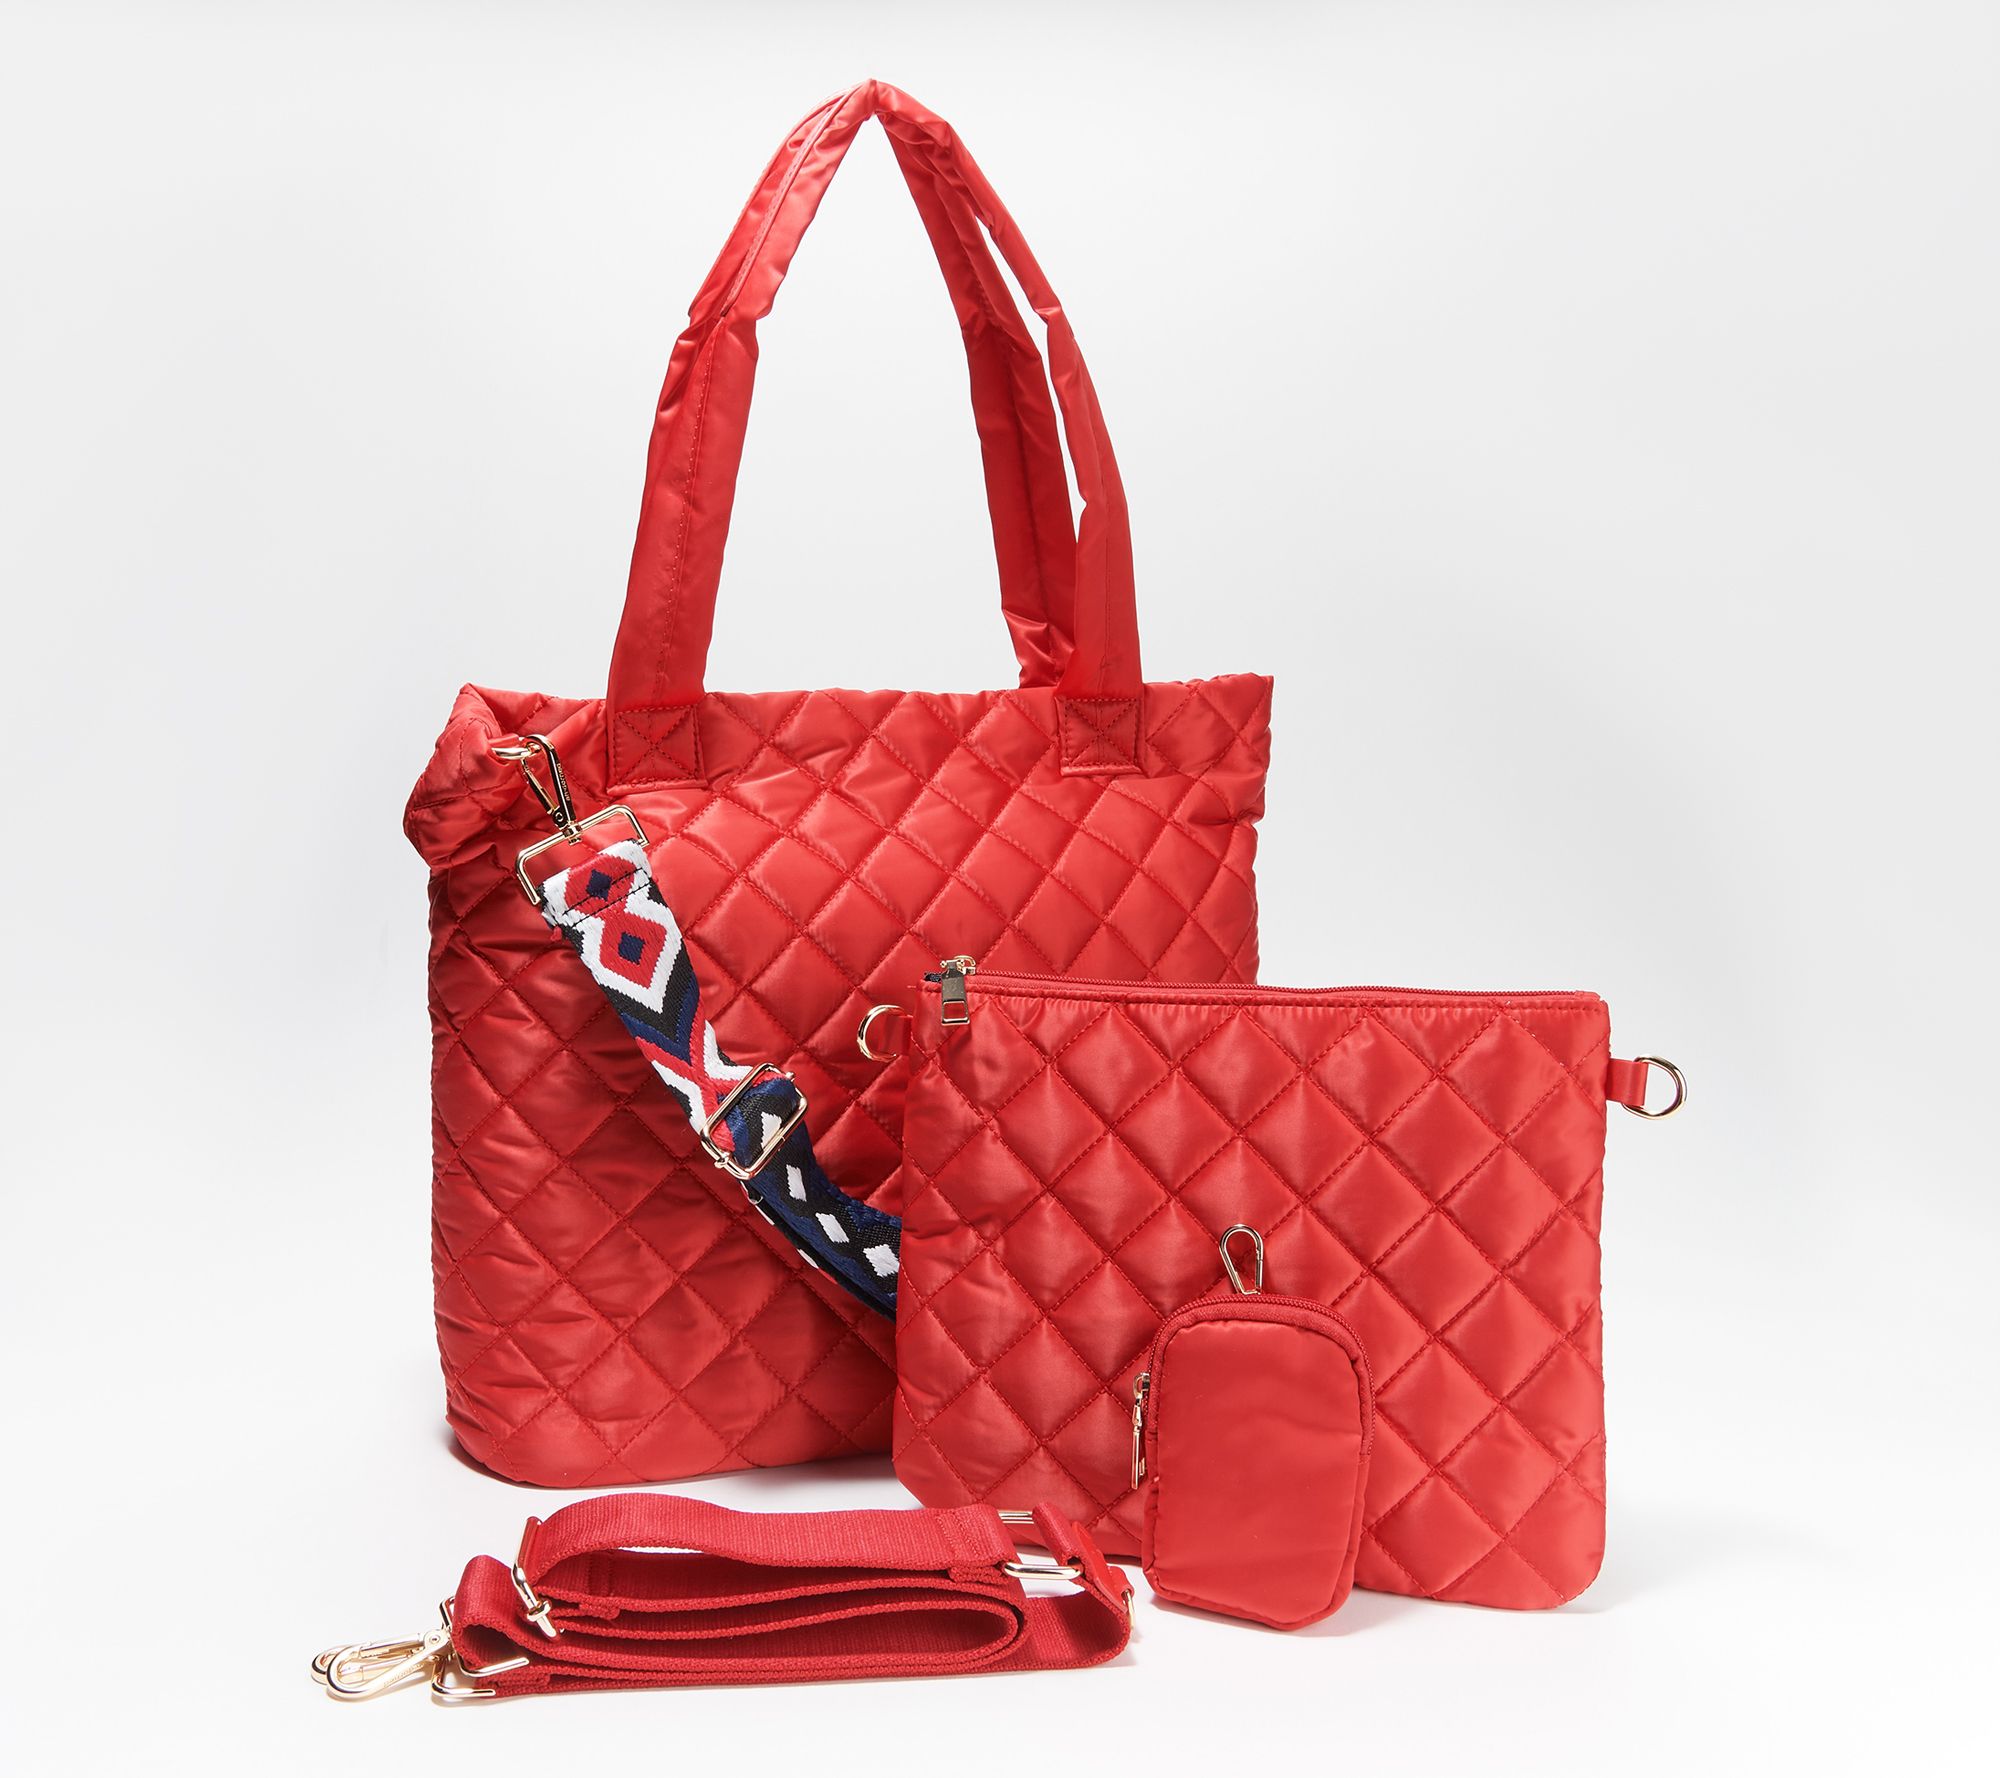 i've always wanted to buy this quilted bag for months, but the one